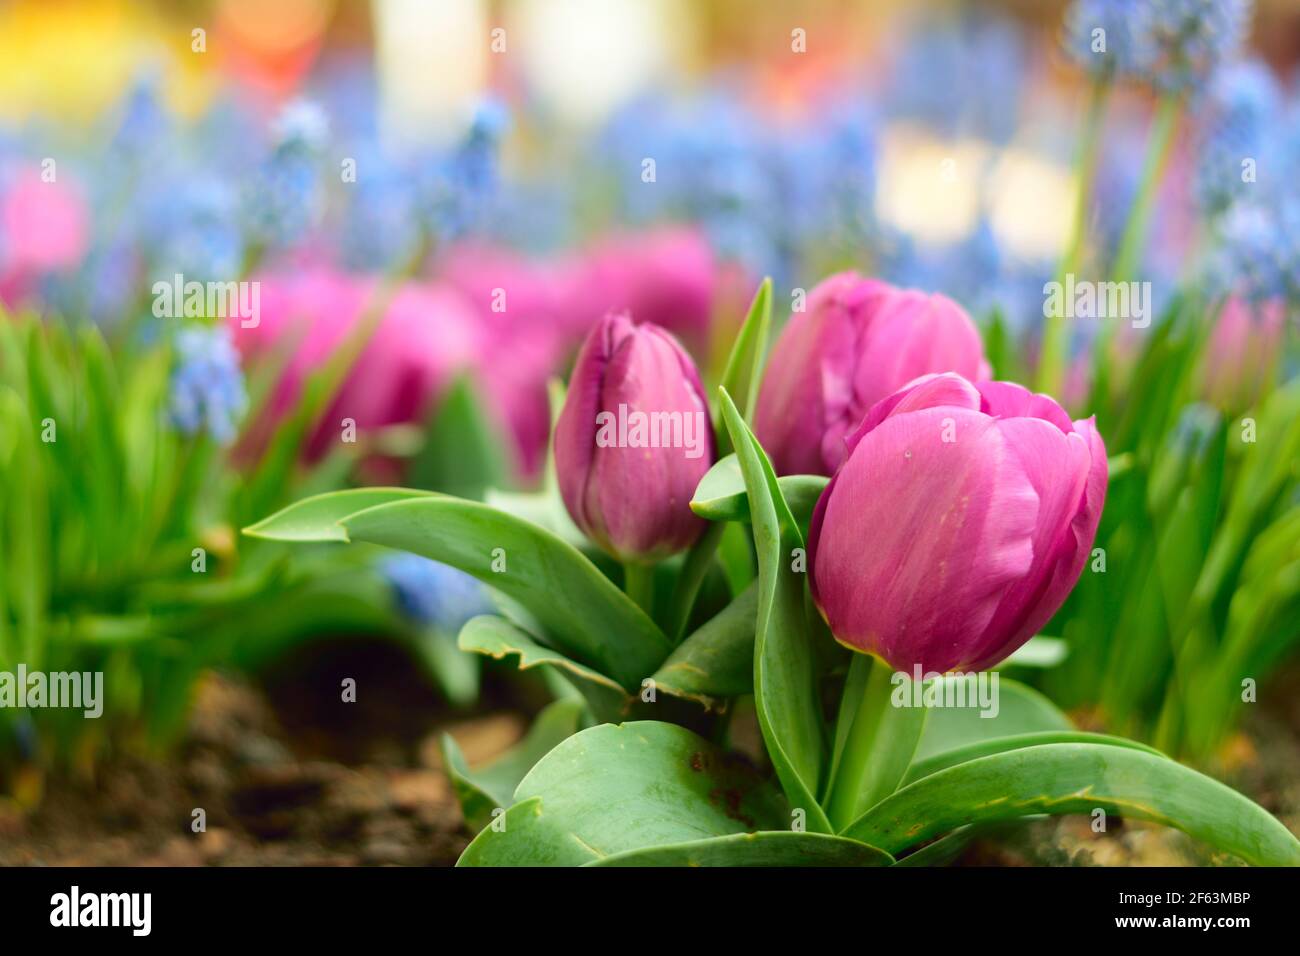 Close up Pink tulips flower on field with a Blurred background. Stock Photo